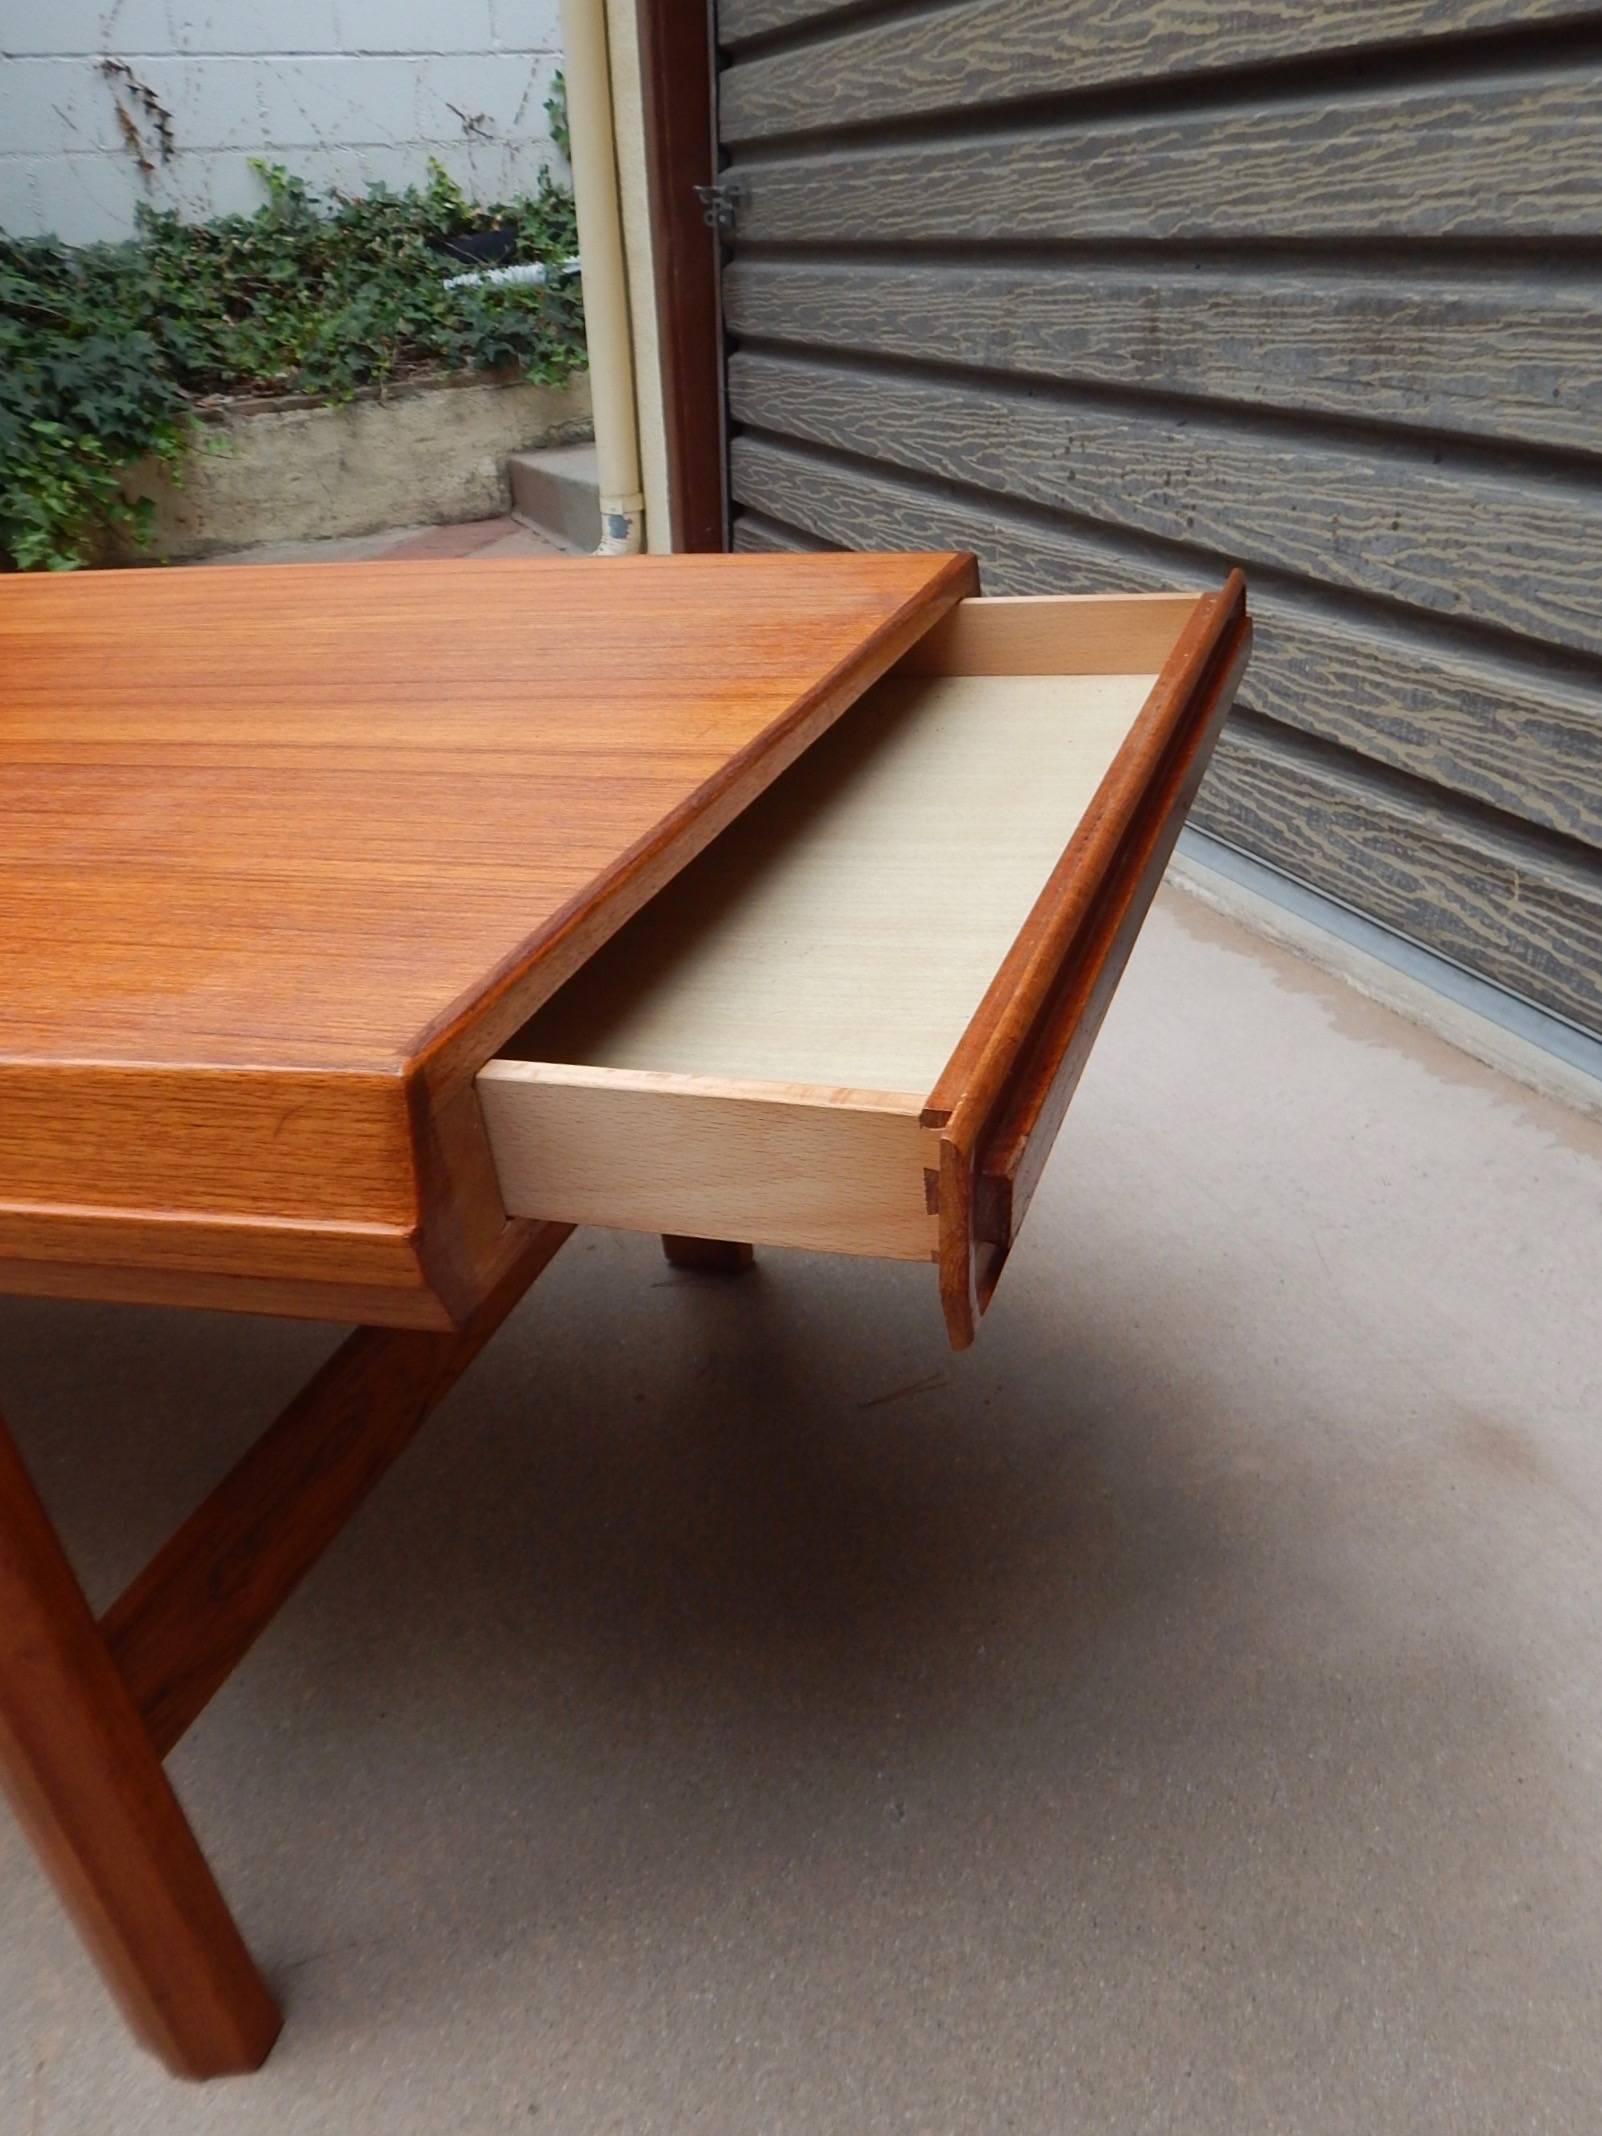 Swedish Mid-Century Modern Teak Coffee Table with Hidden Side Drawers For Sale 4